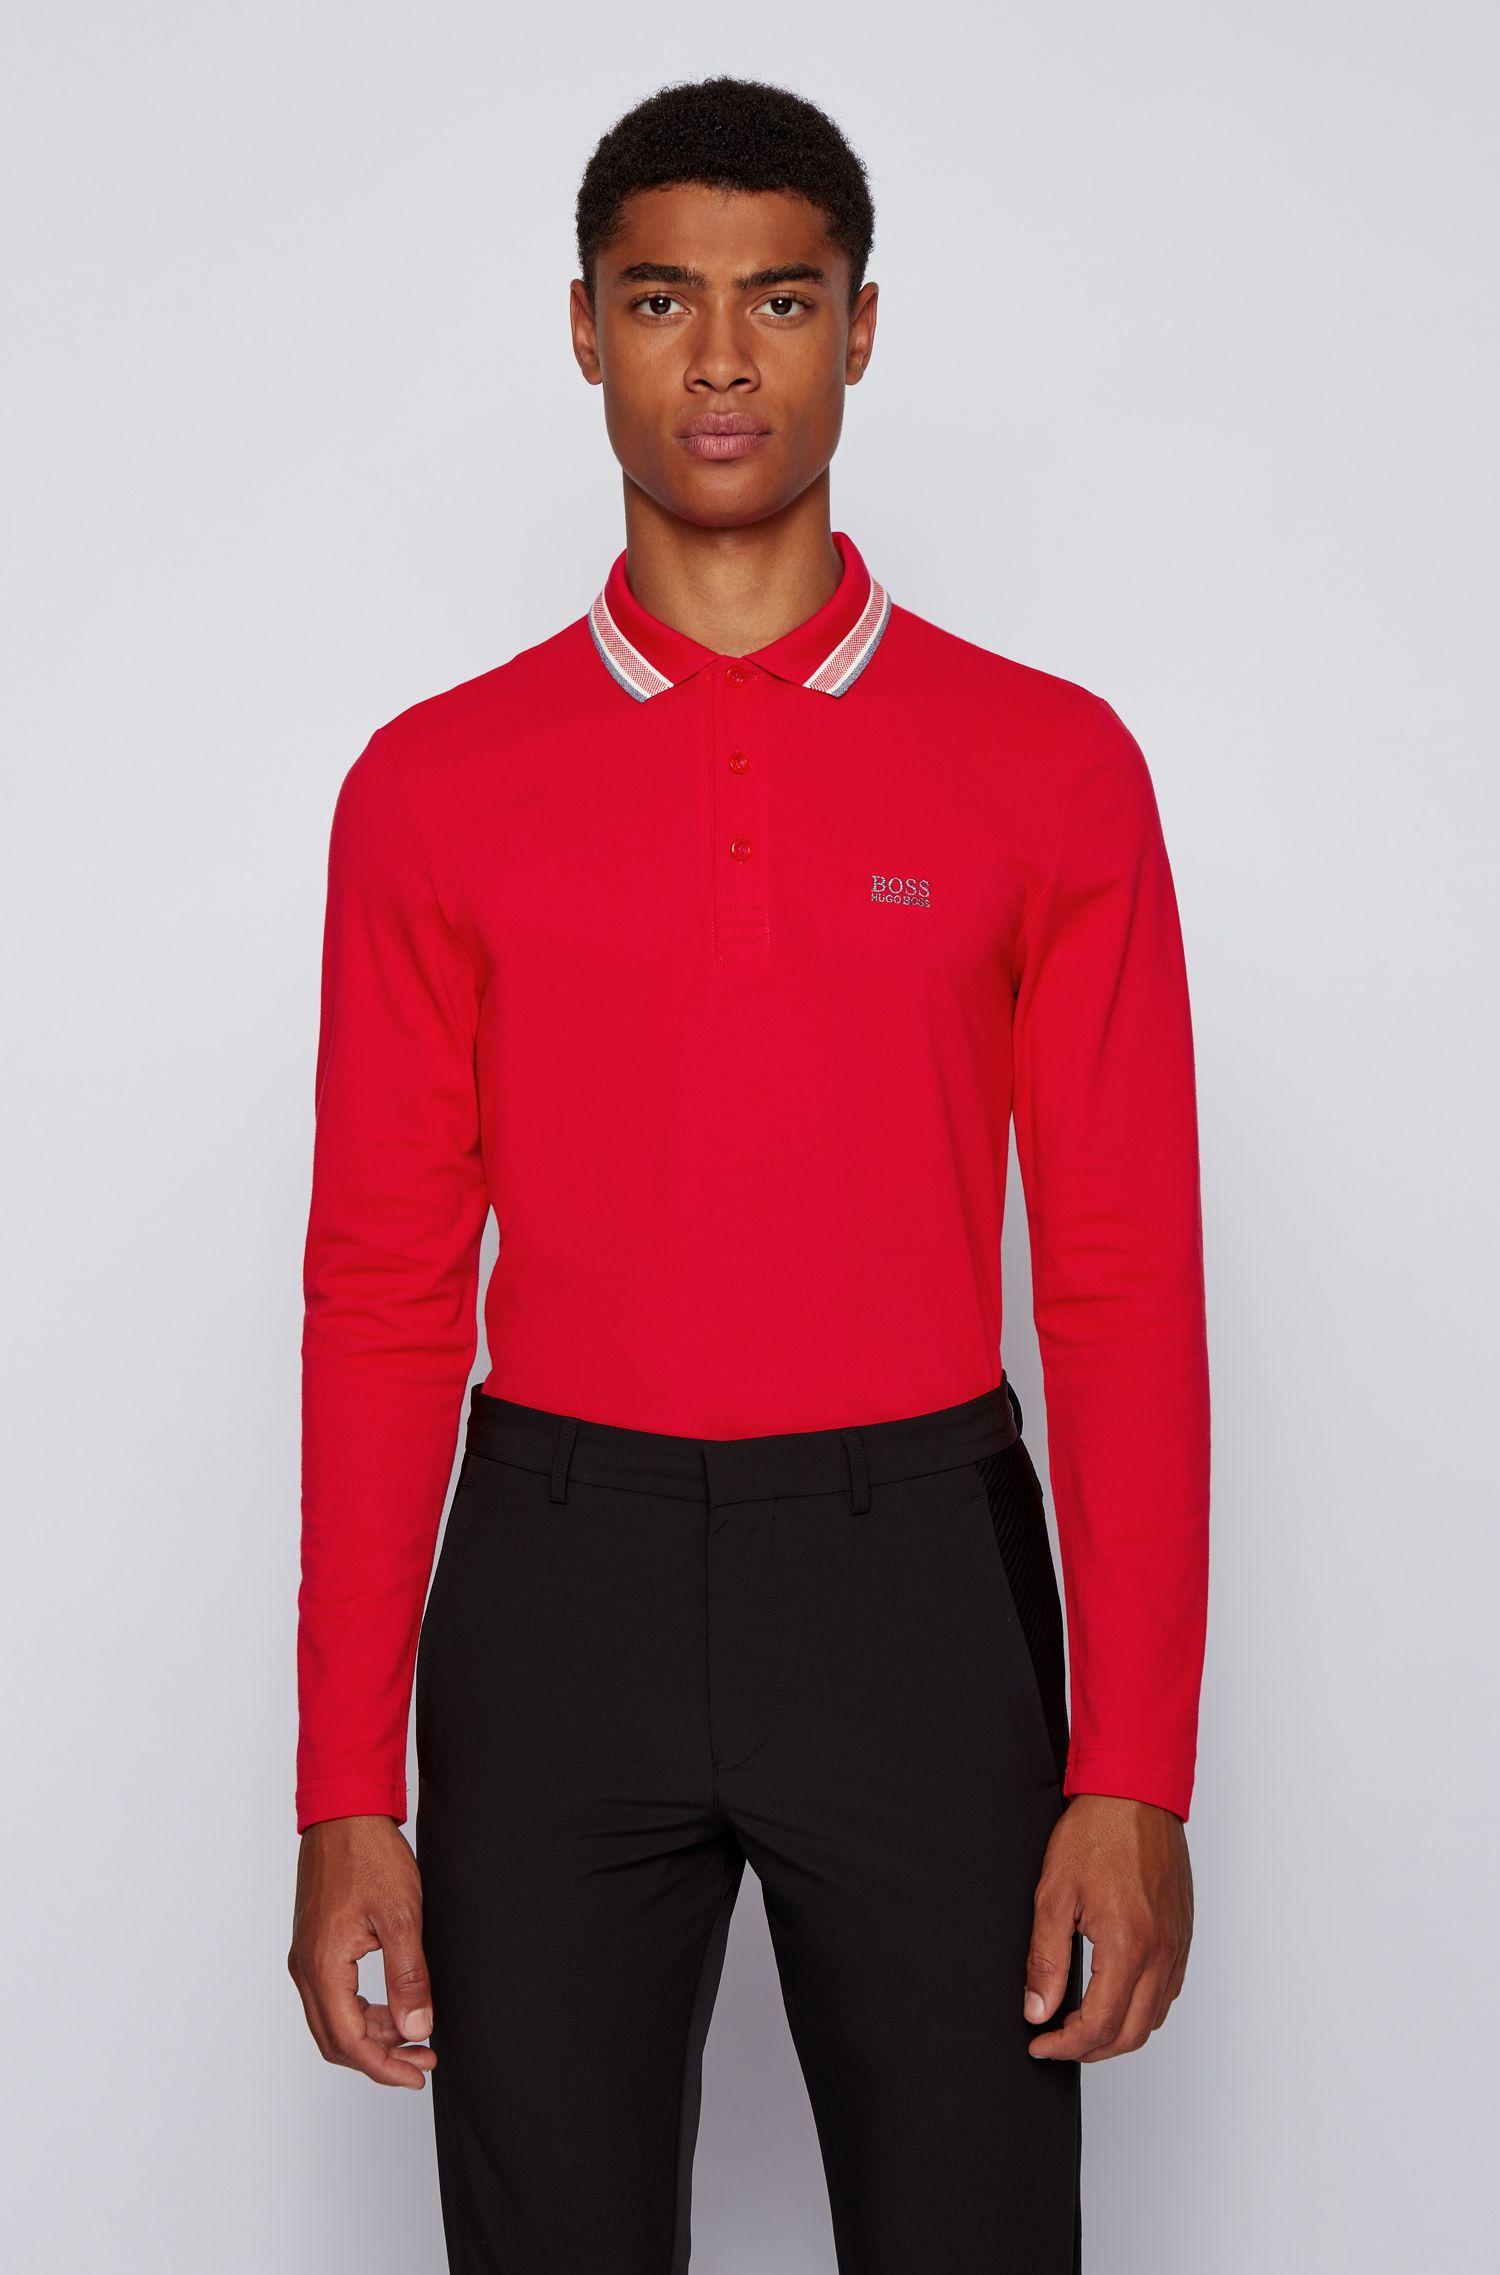 BOSS by Hugo Boss Regular Fit Polo In Piqué Cotton in Red for Men - Lyst